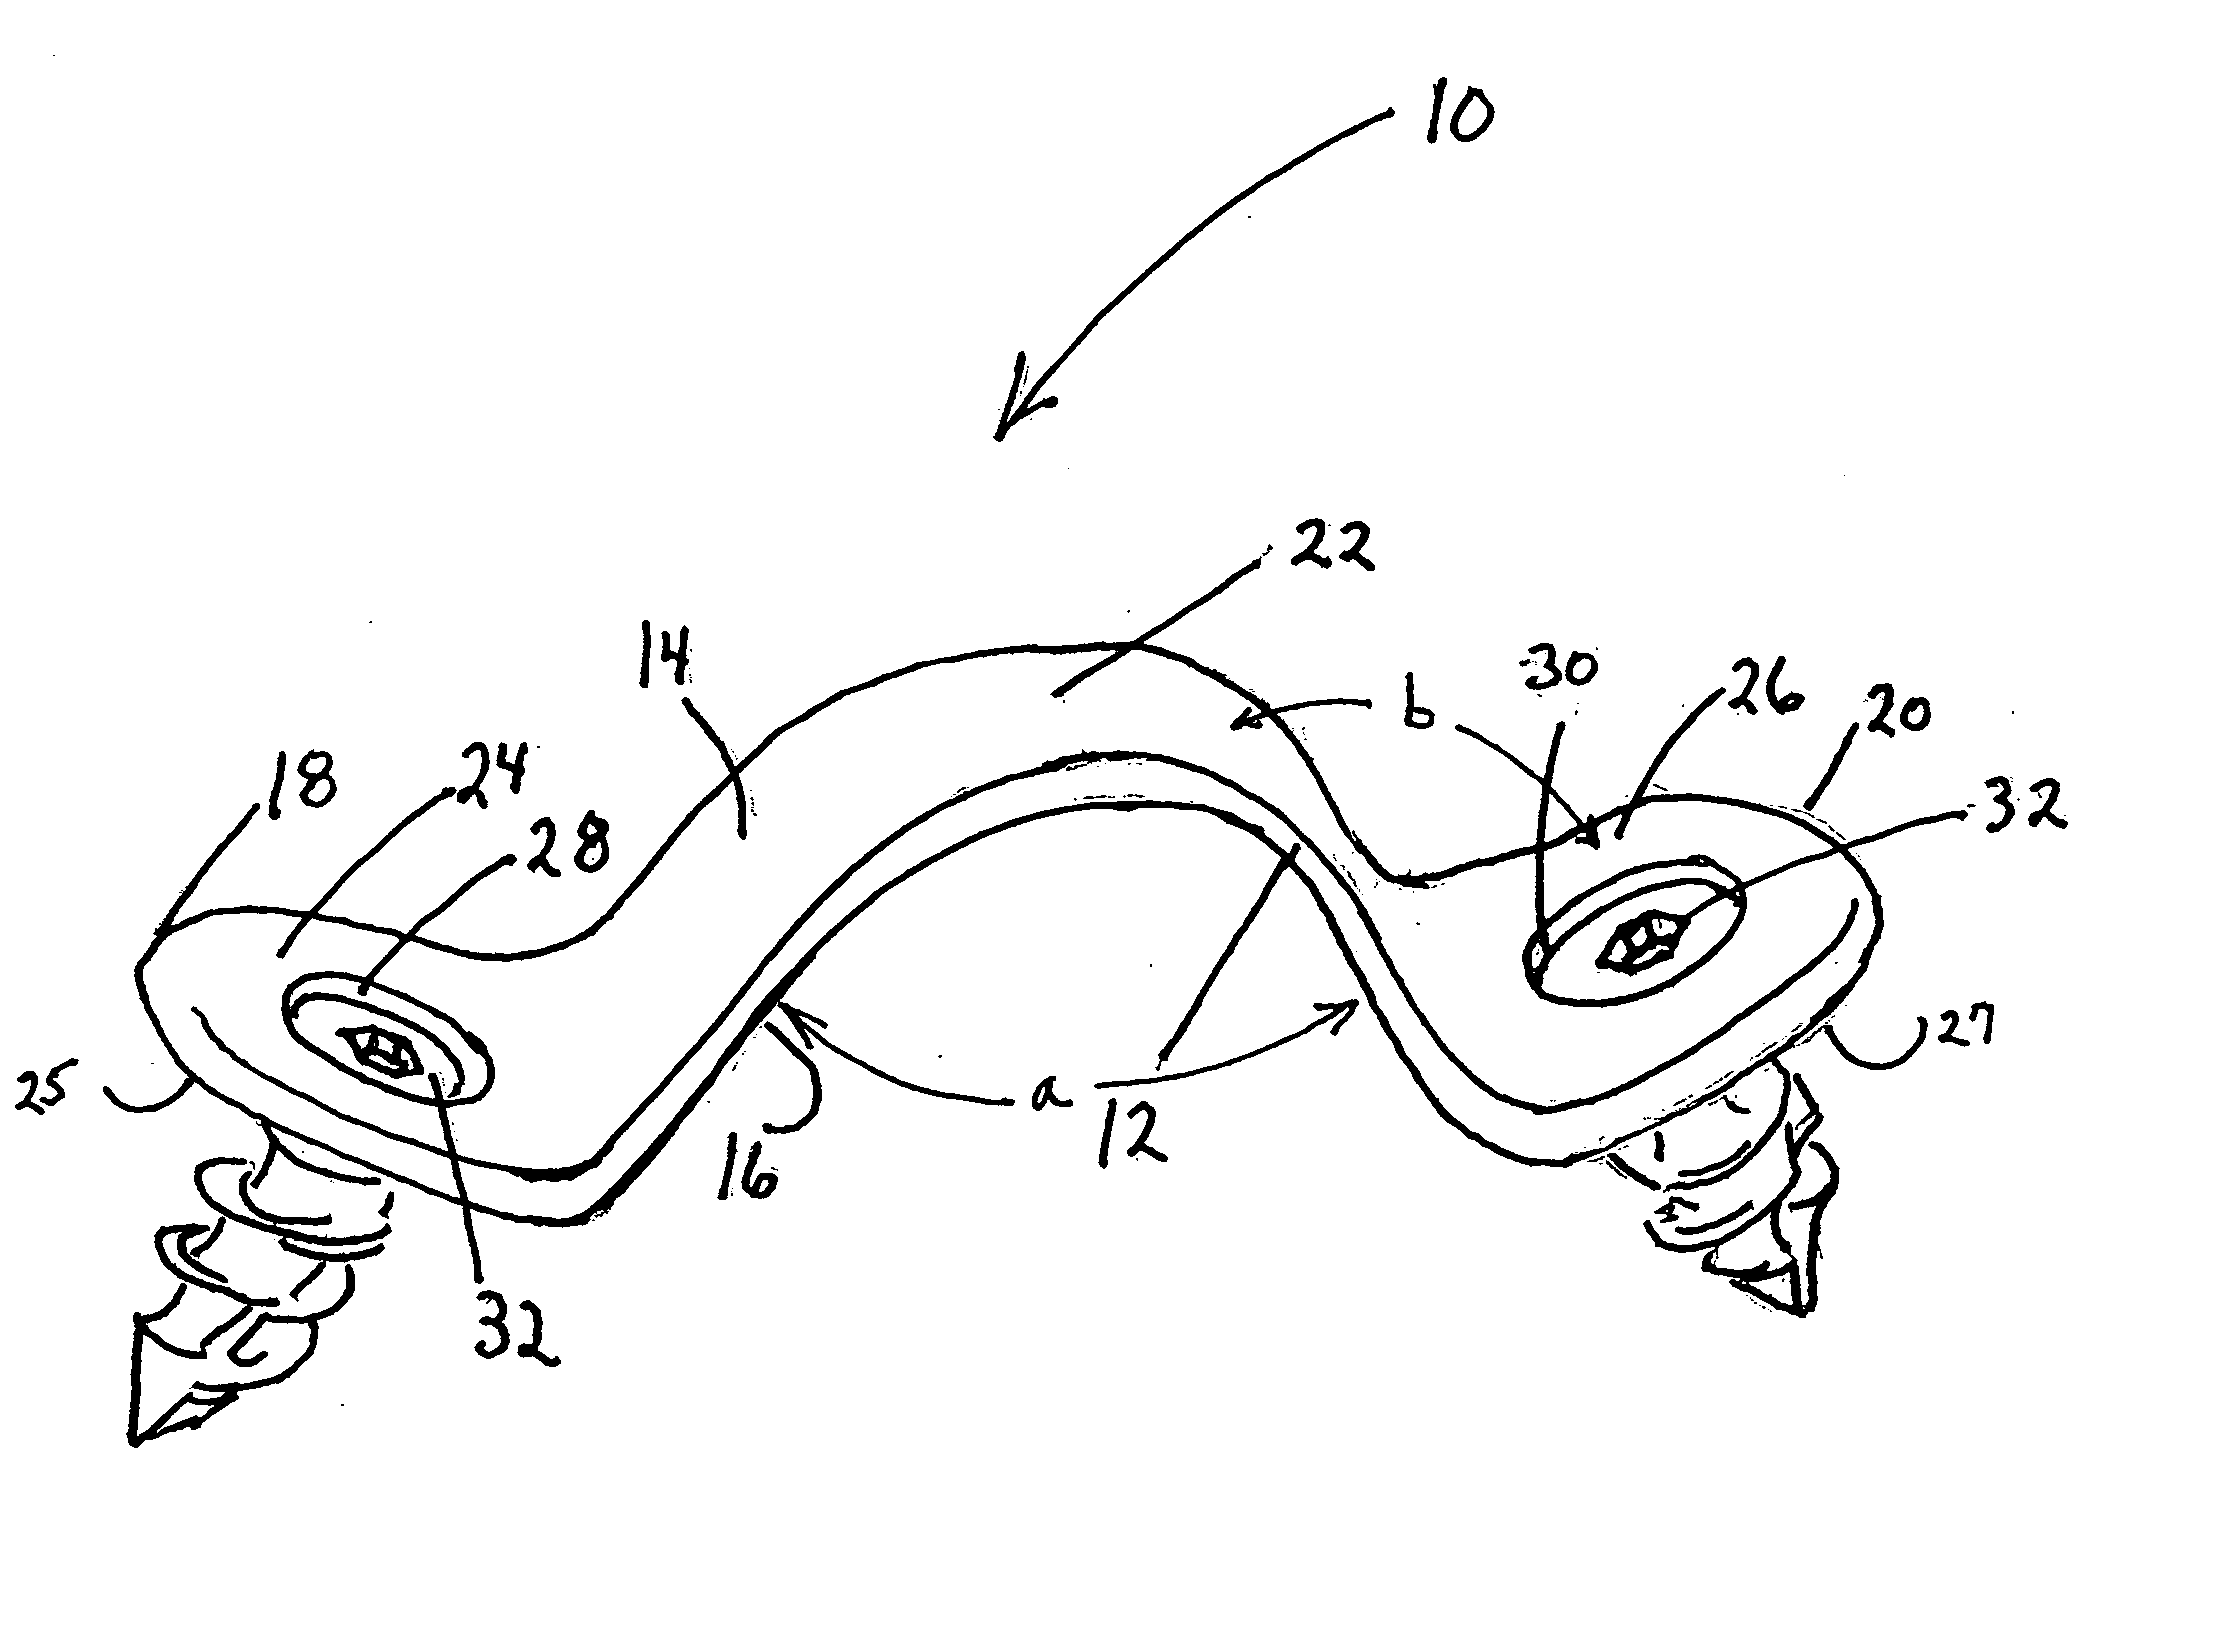 Facet triangle spinal fixation device and method of use